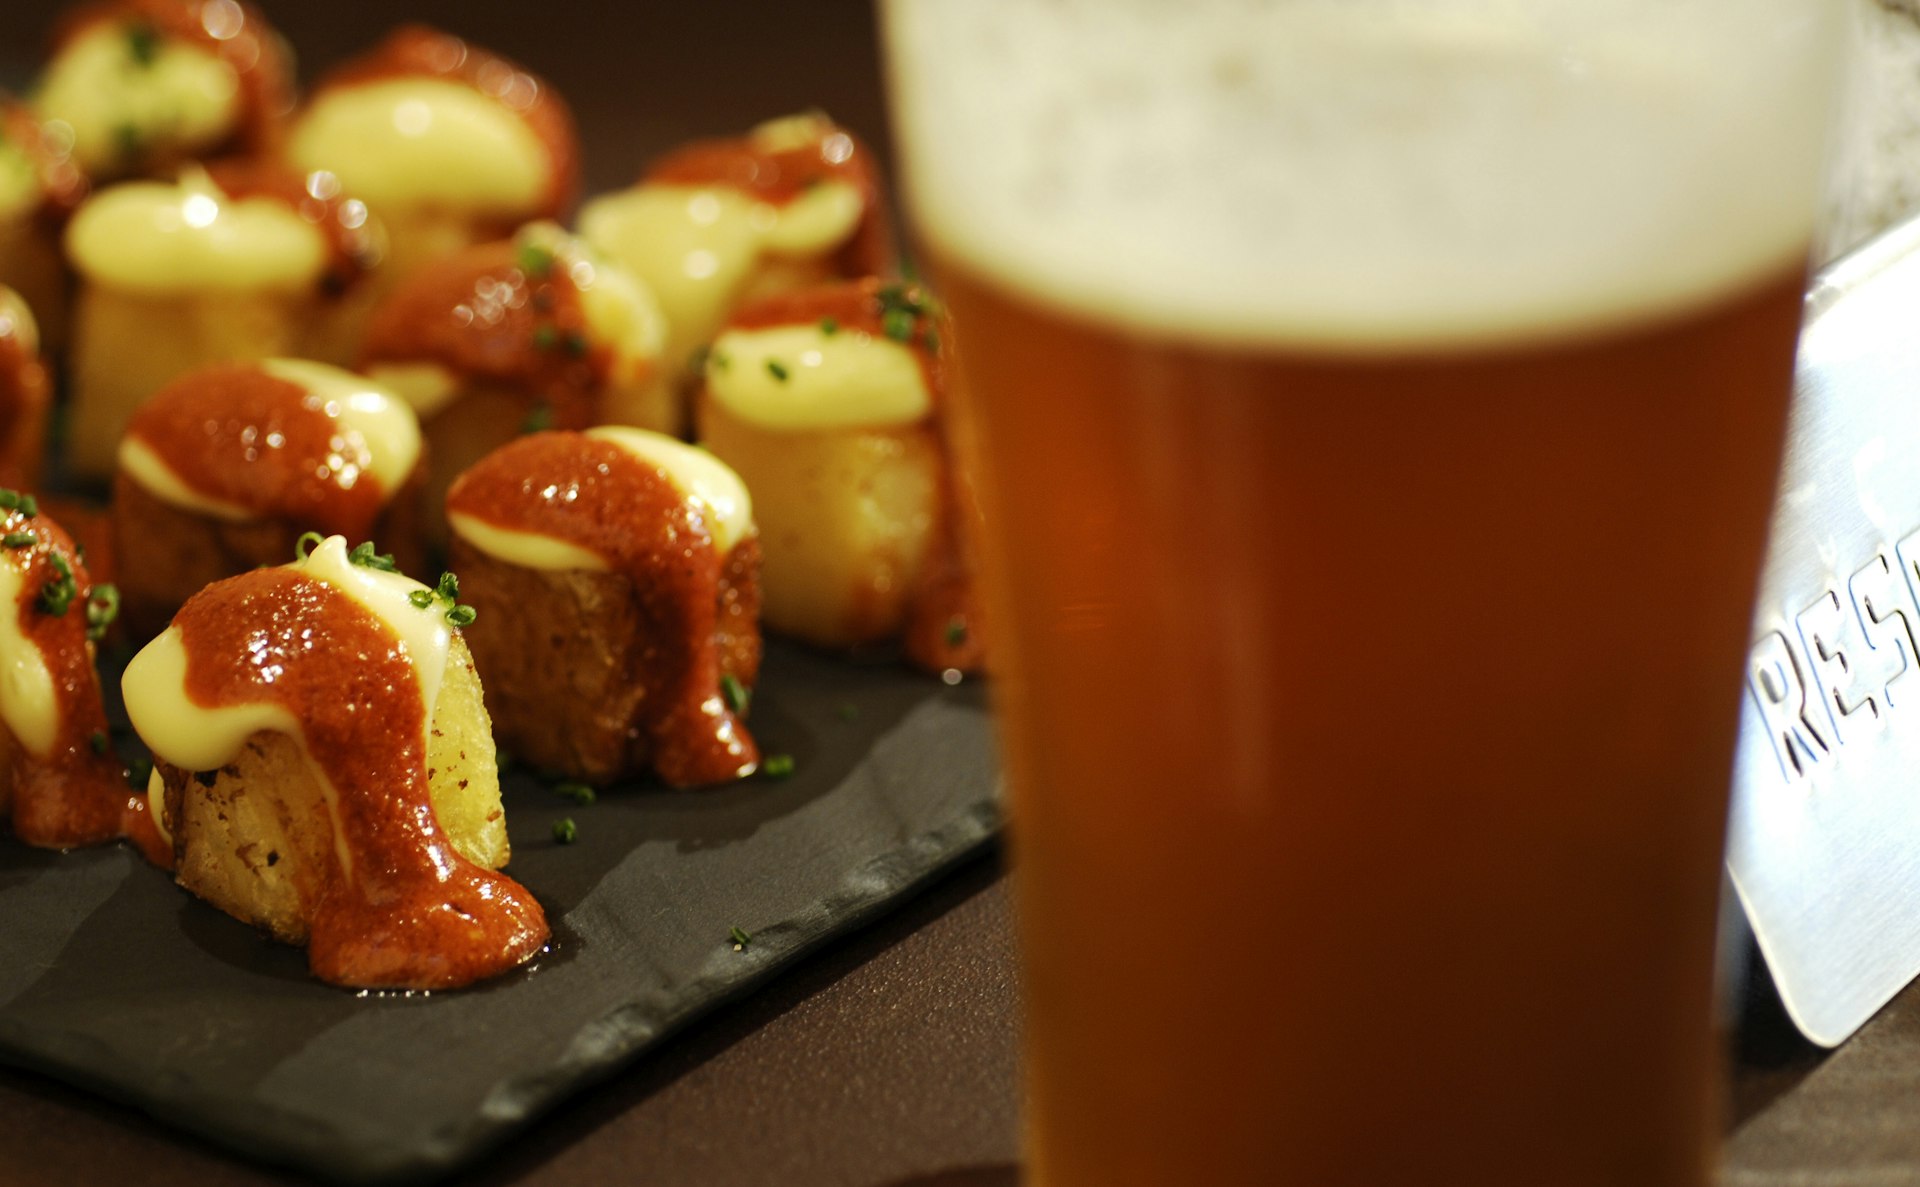 Spanish tapas and beer